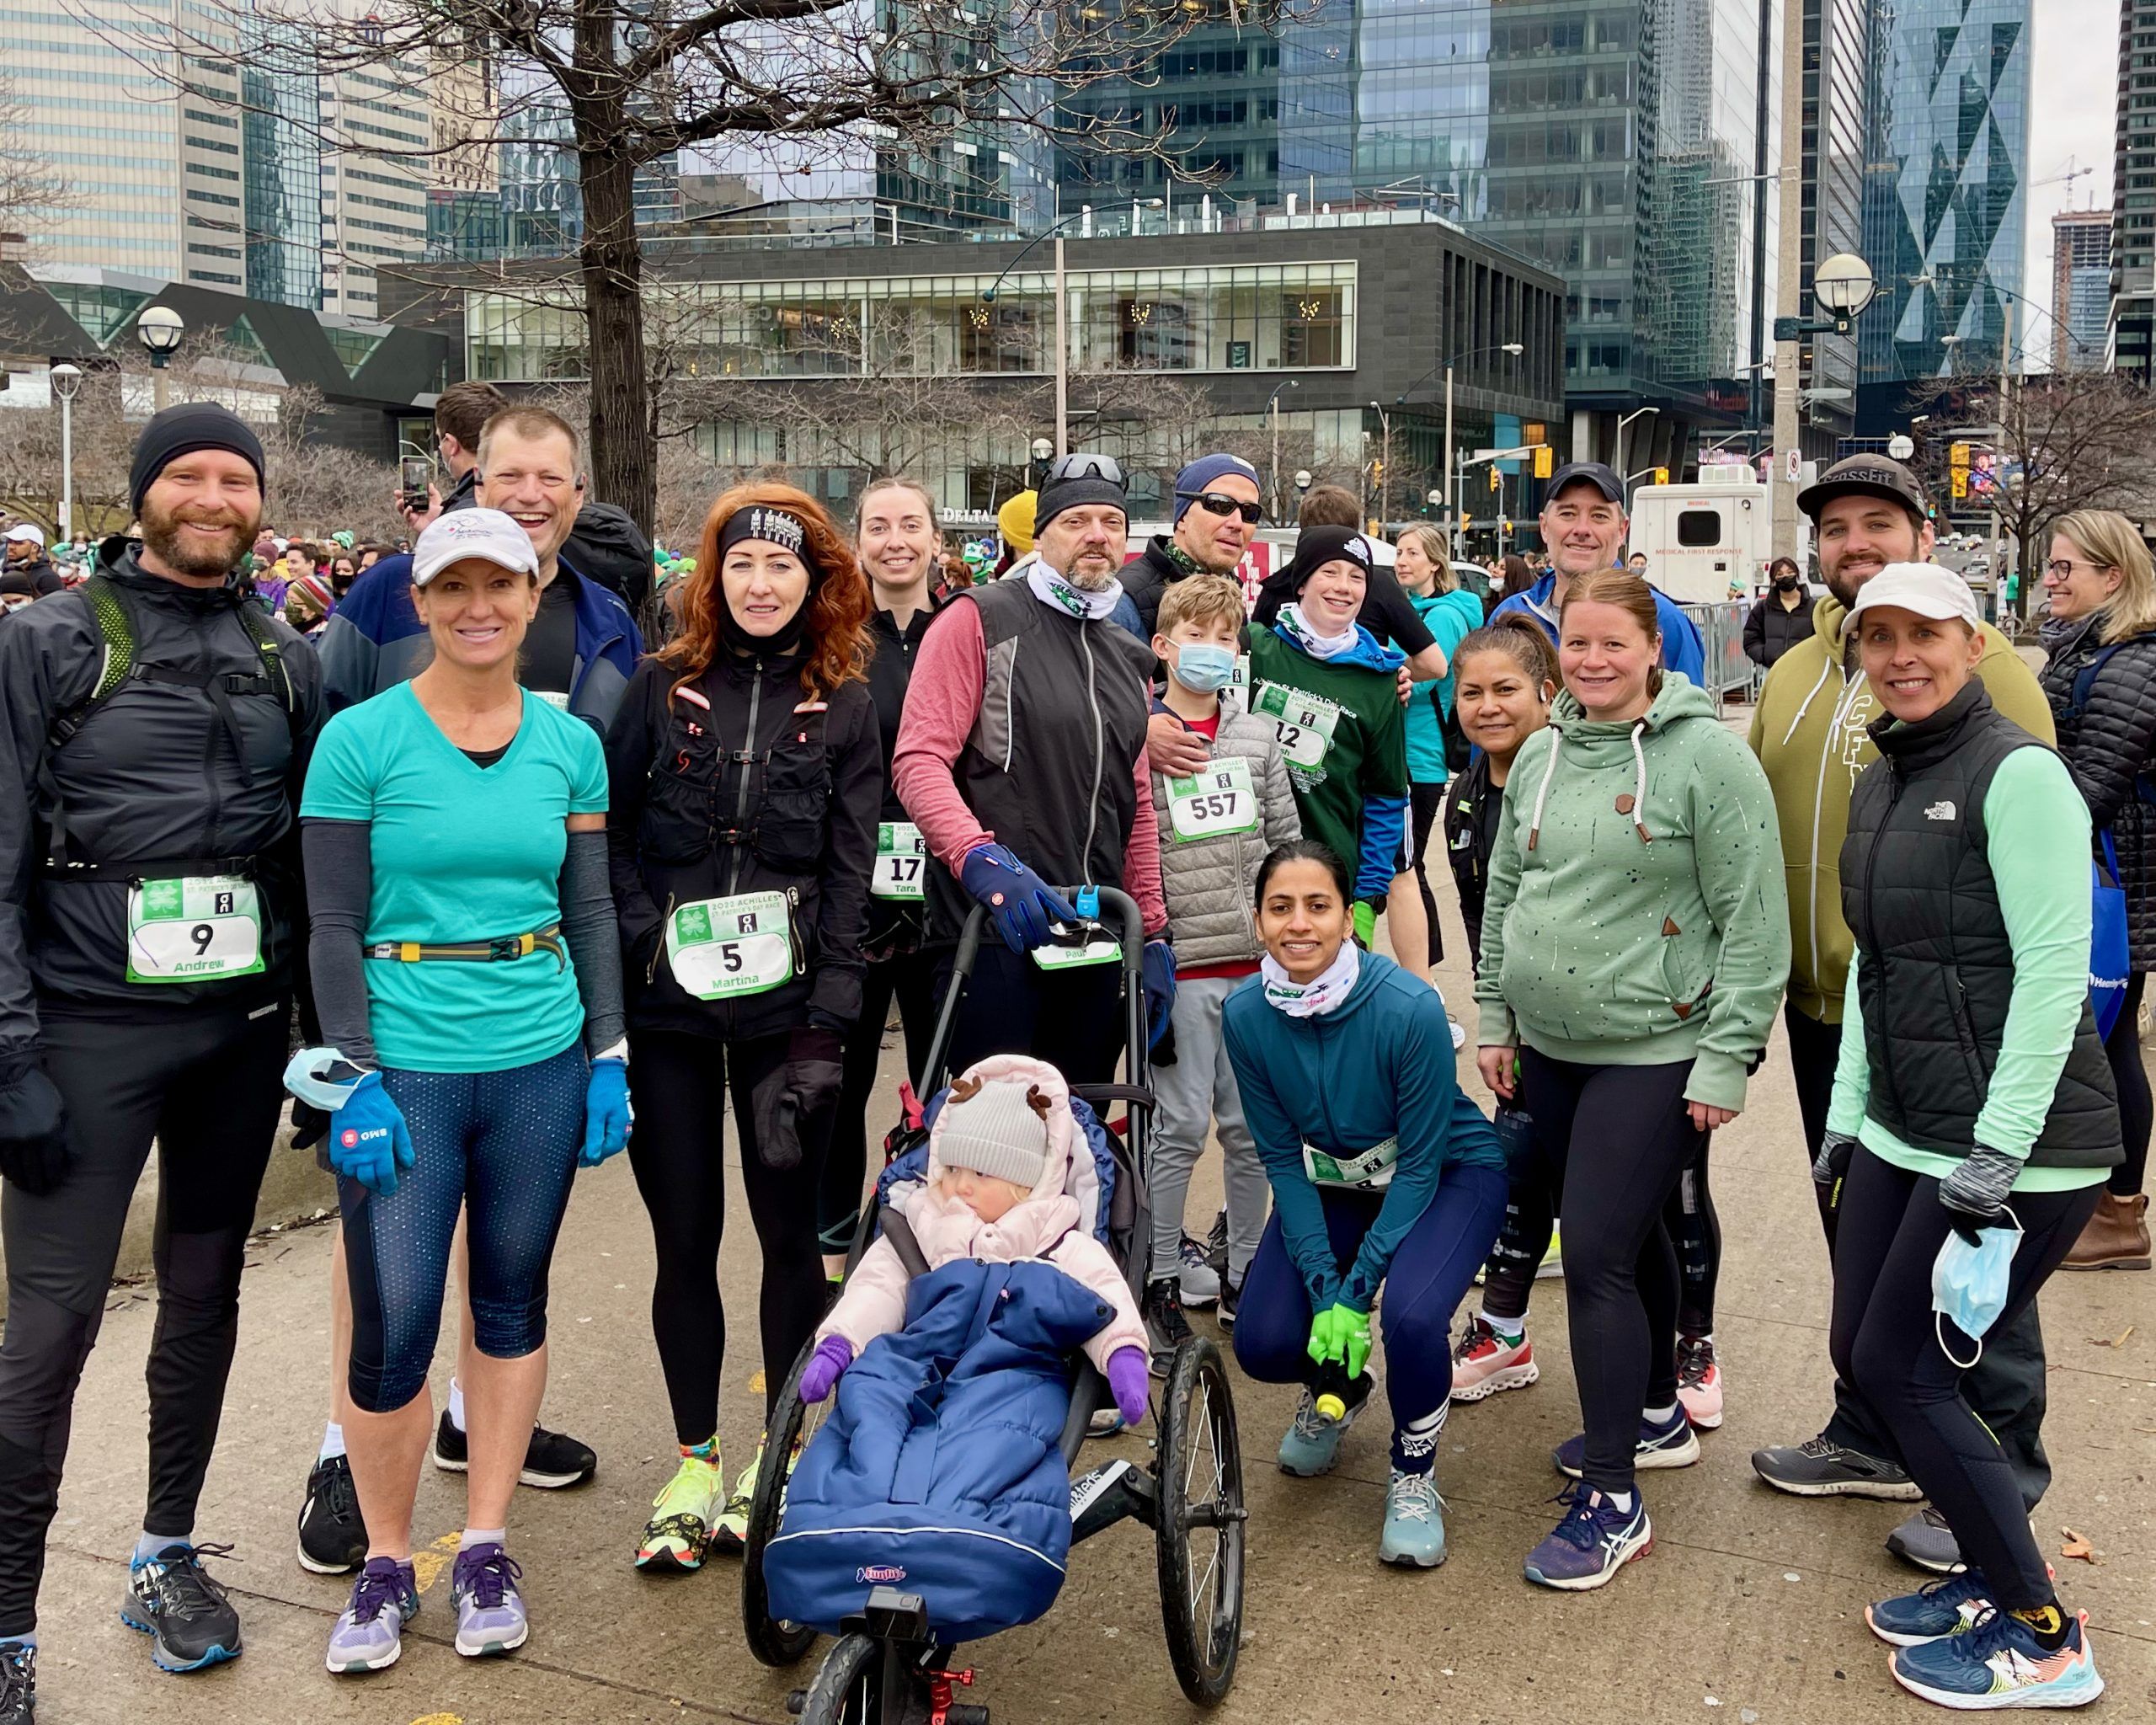 The Crossfit Colosseum Running group at Achilles Canada St. Patrick’s Day Race 2022